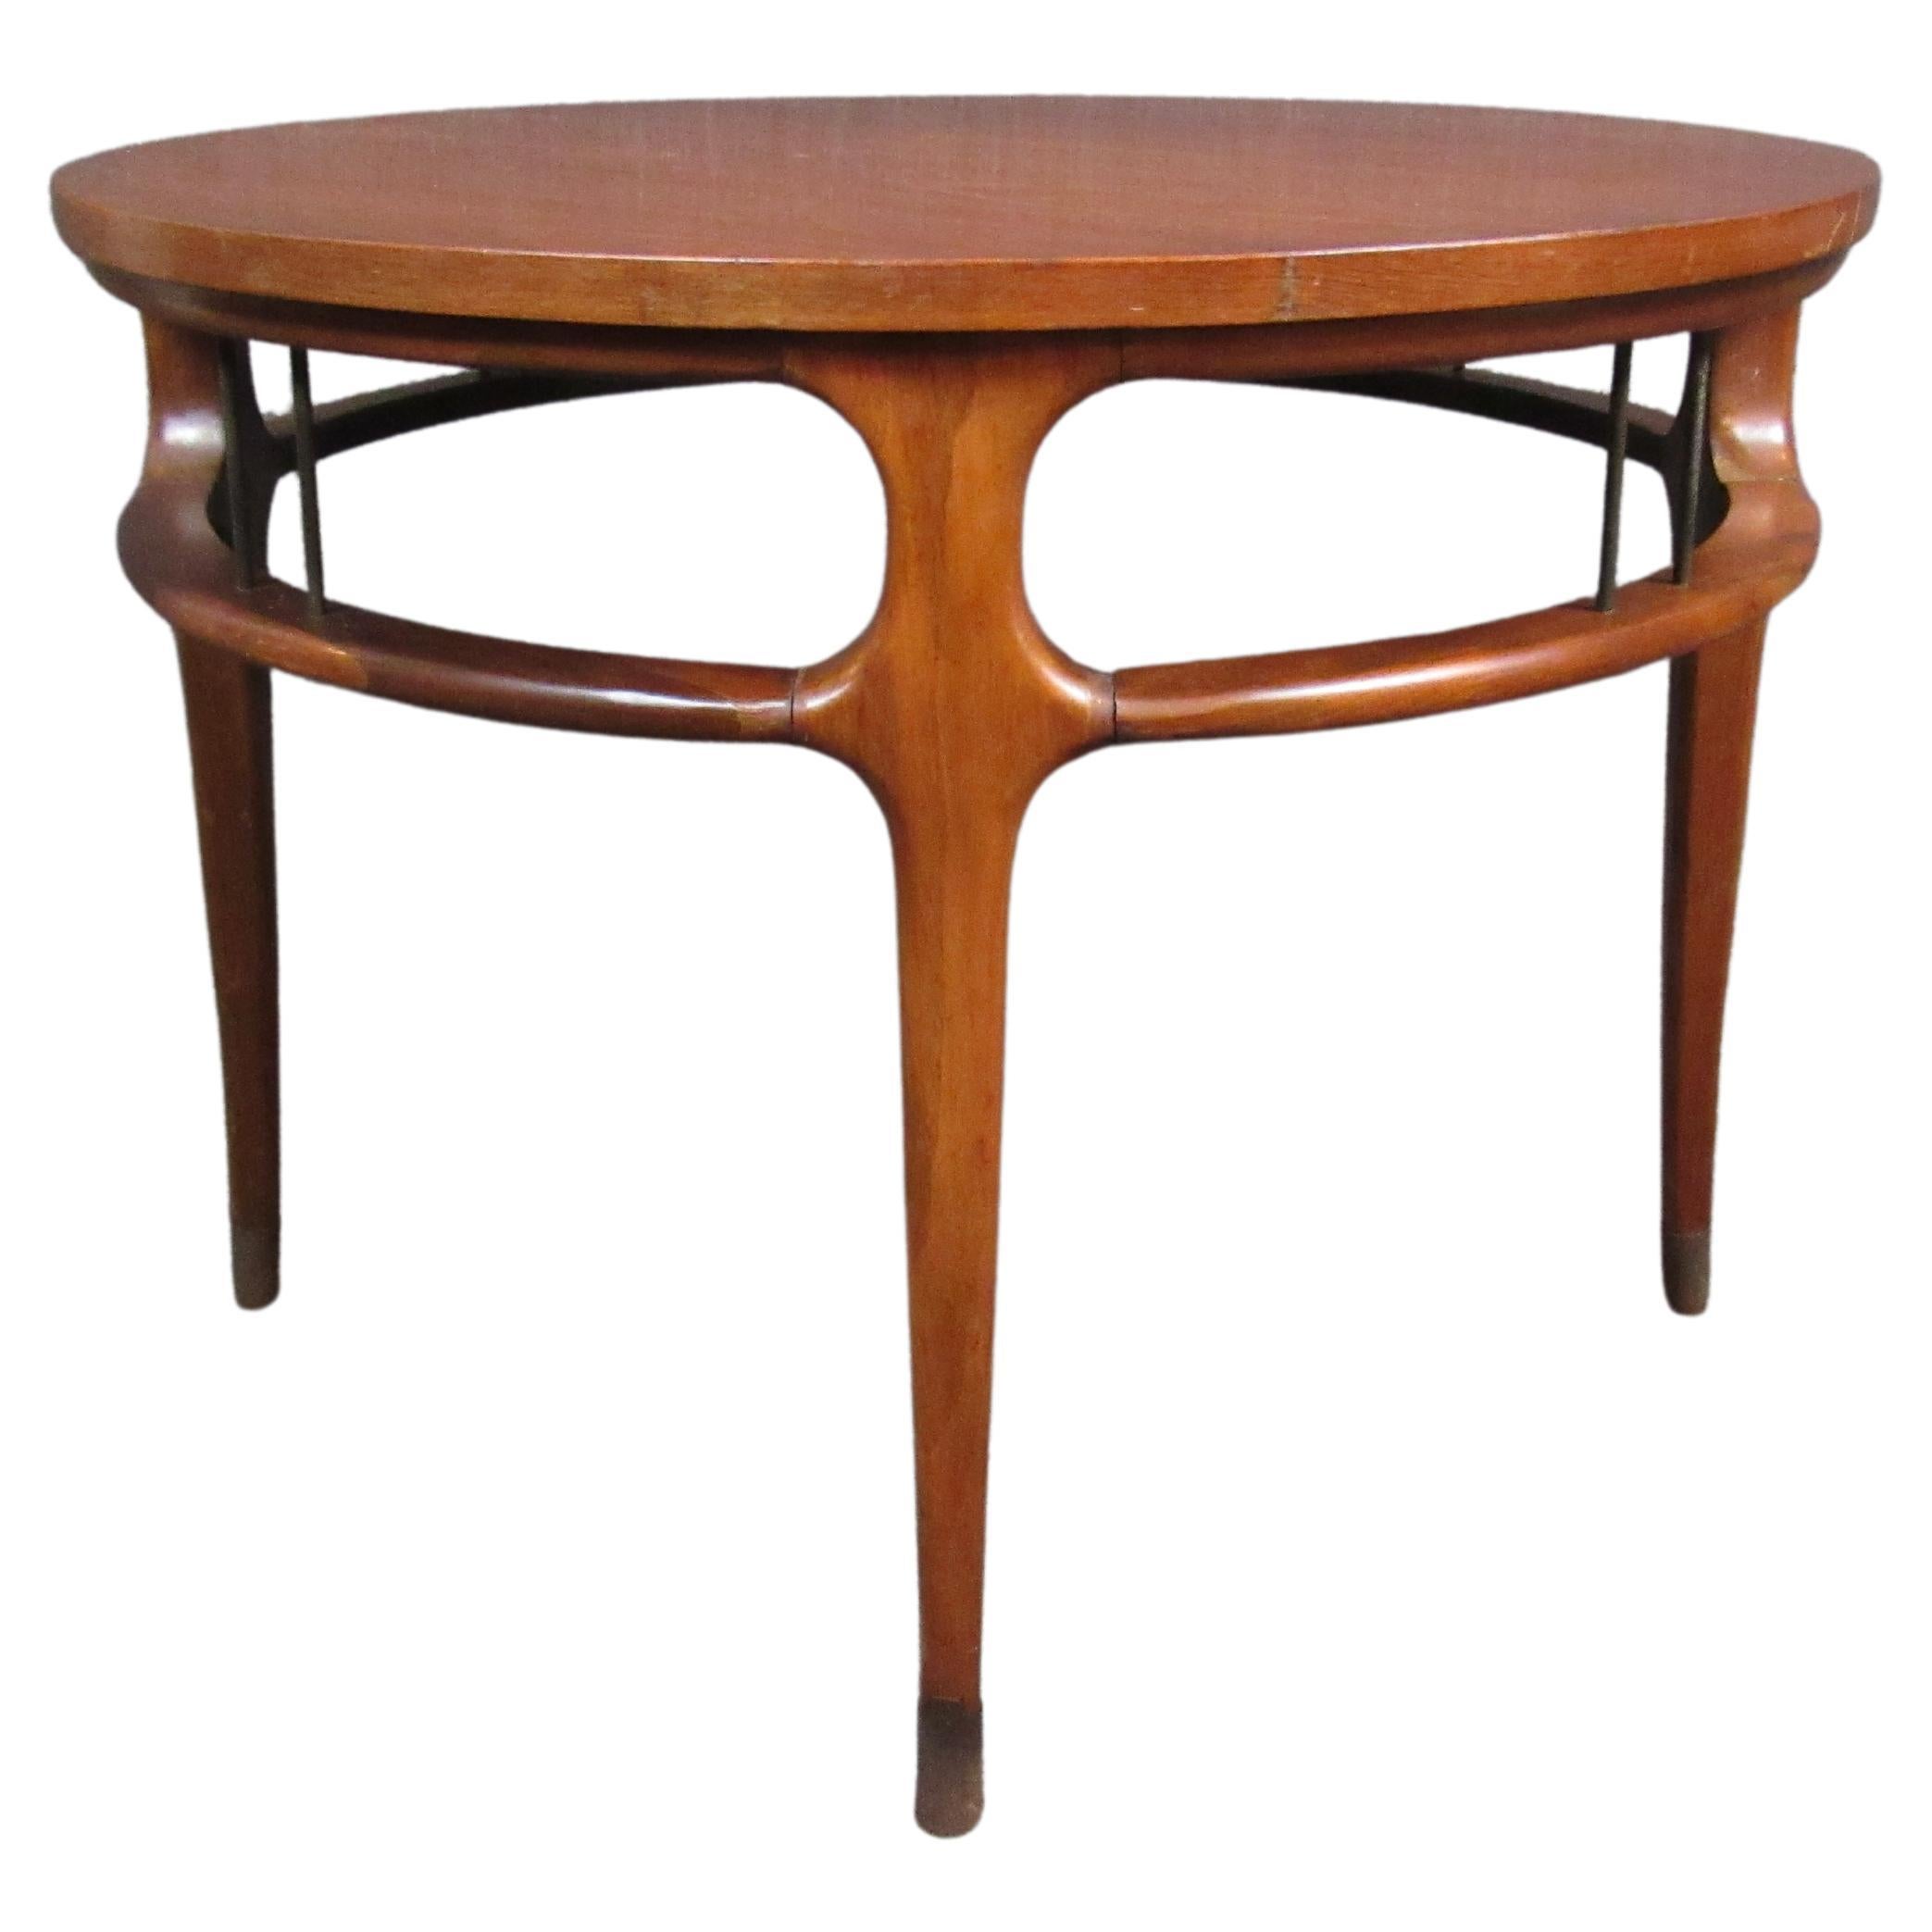 Lovely round vintage walnut table by Gordon's Inc. of Johnson City, Tennessee. Slim, elegant sculpted legs bring an element of sophistication into any space in the home or office. A 30